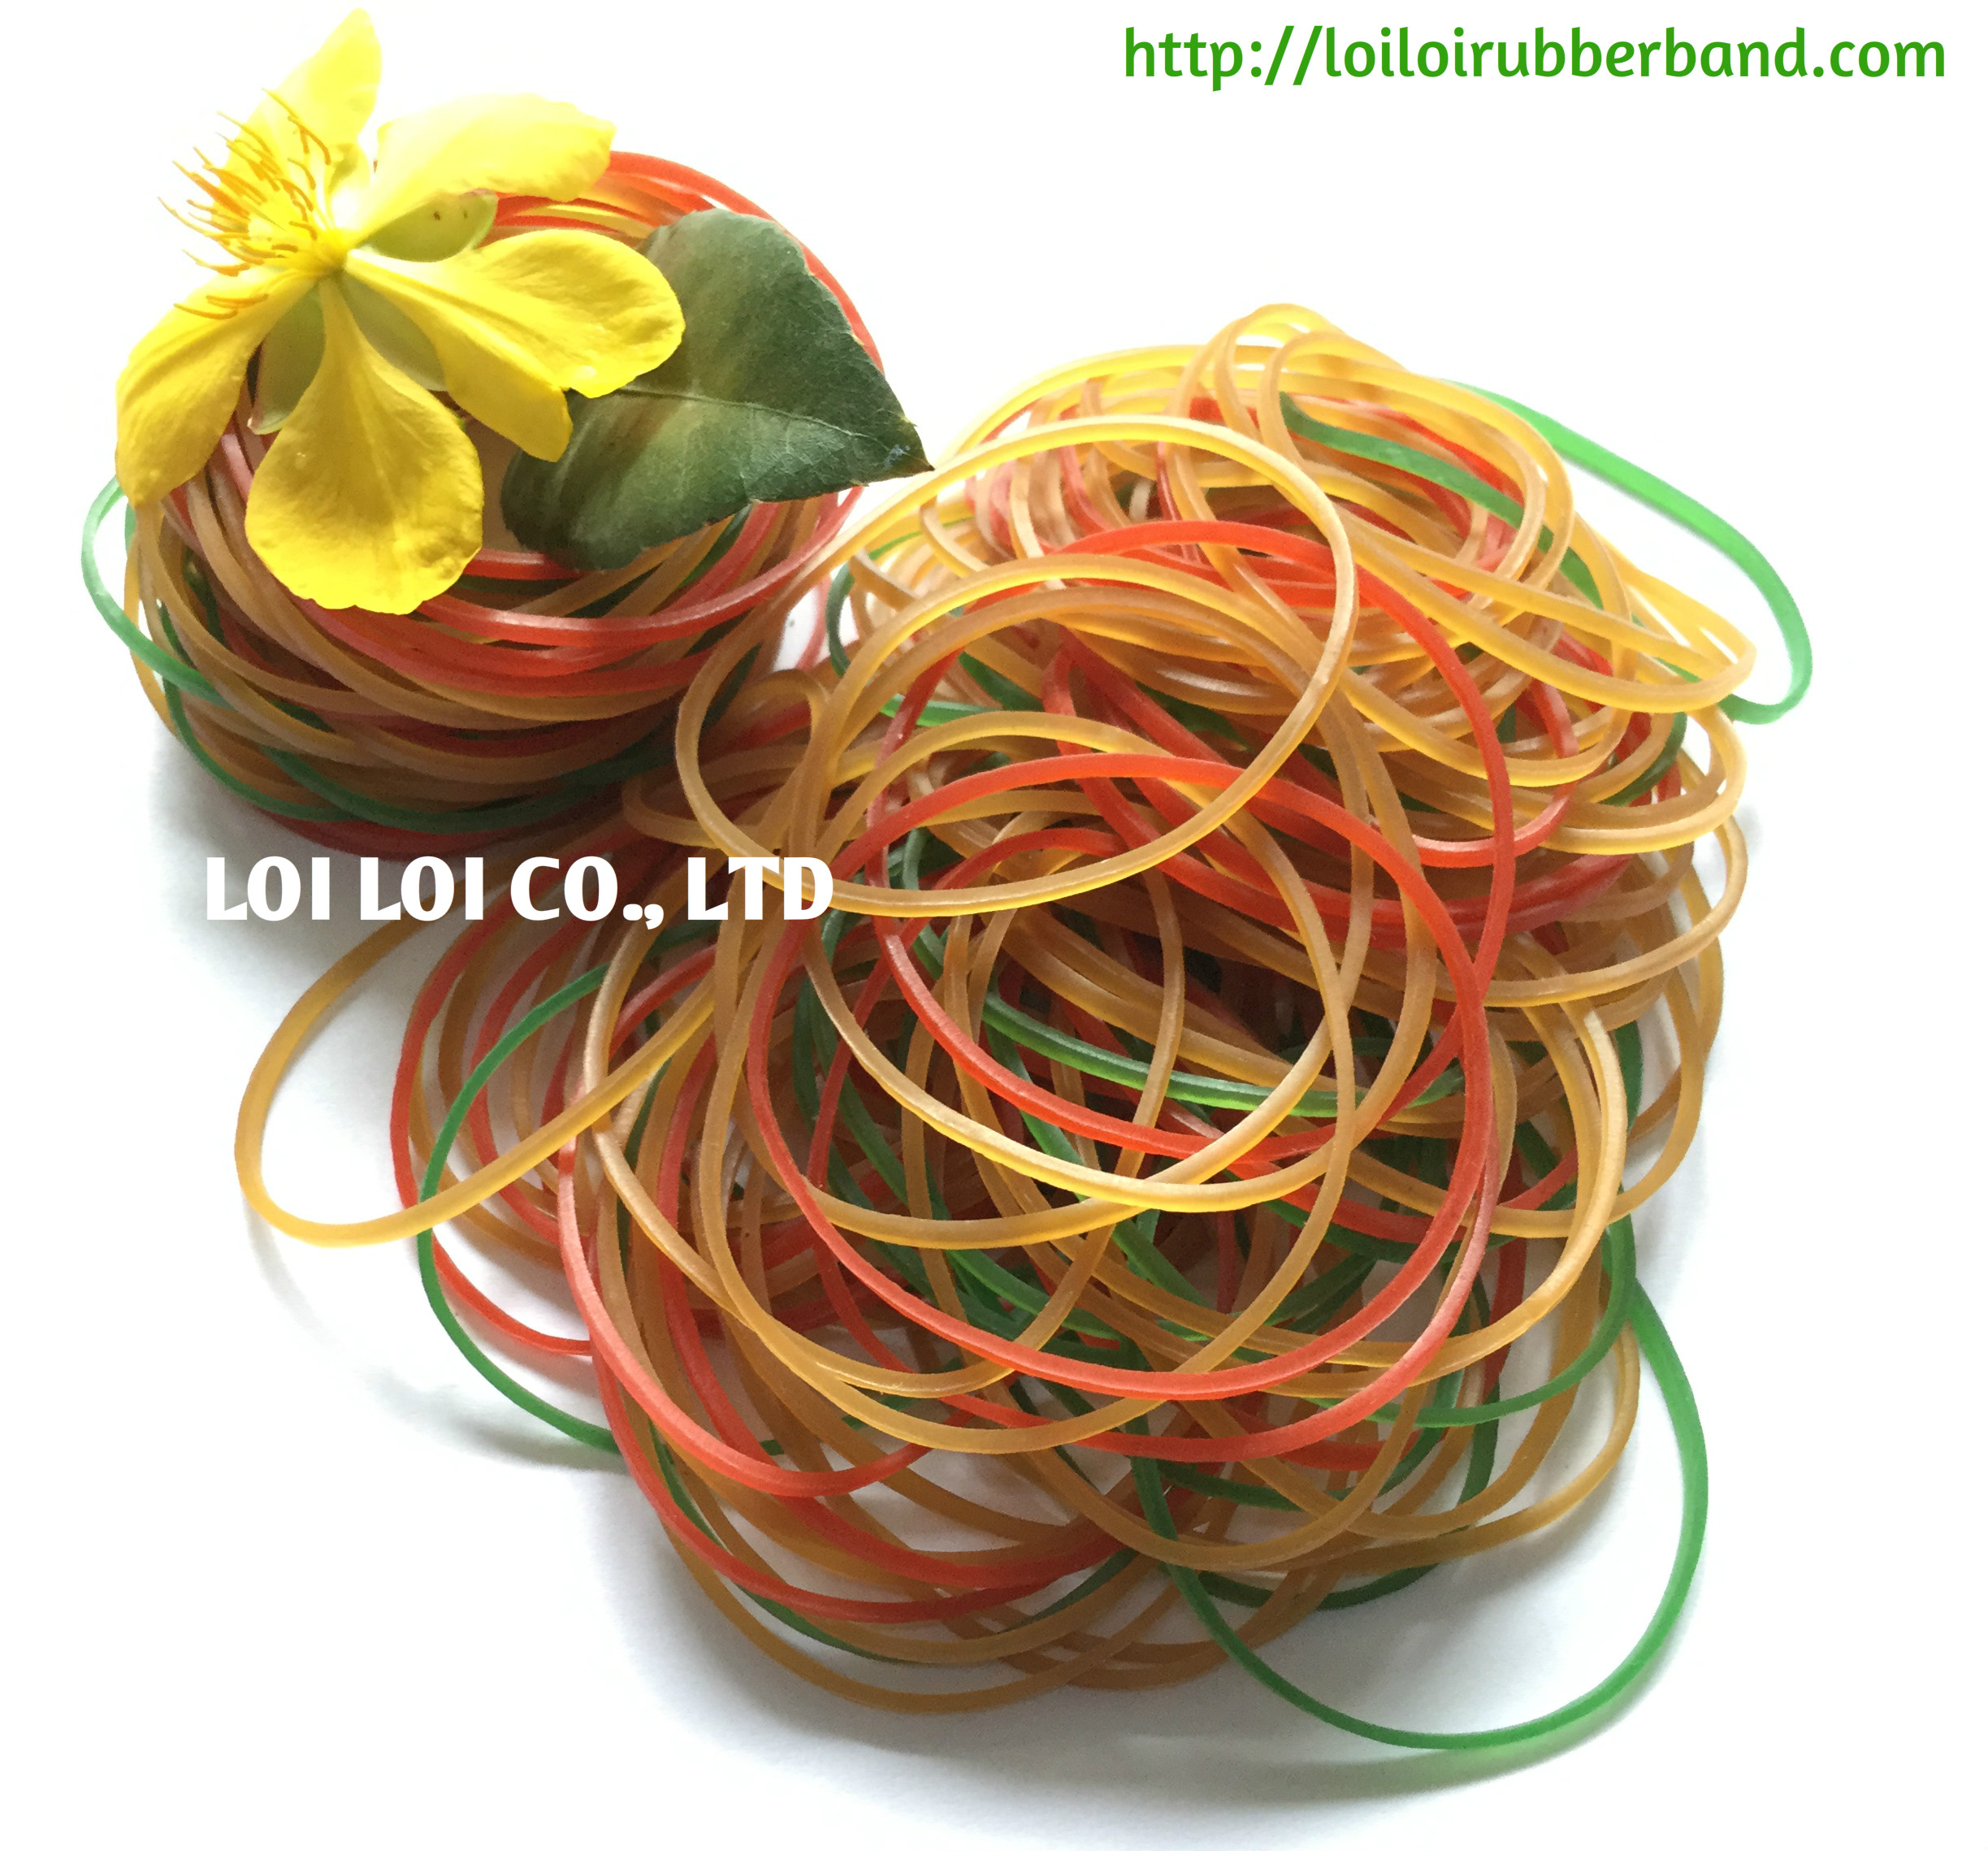 2020 newest 100% Natural Rubber Bands Manufacturer from Vietnam / Environmental Elastic Rubber Band Hot sell to tie up hair 